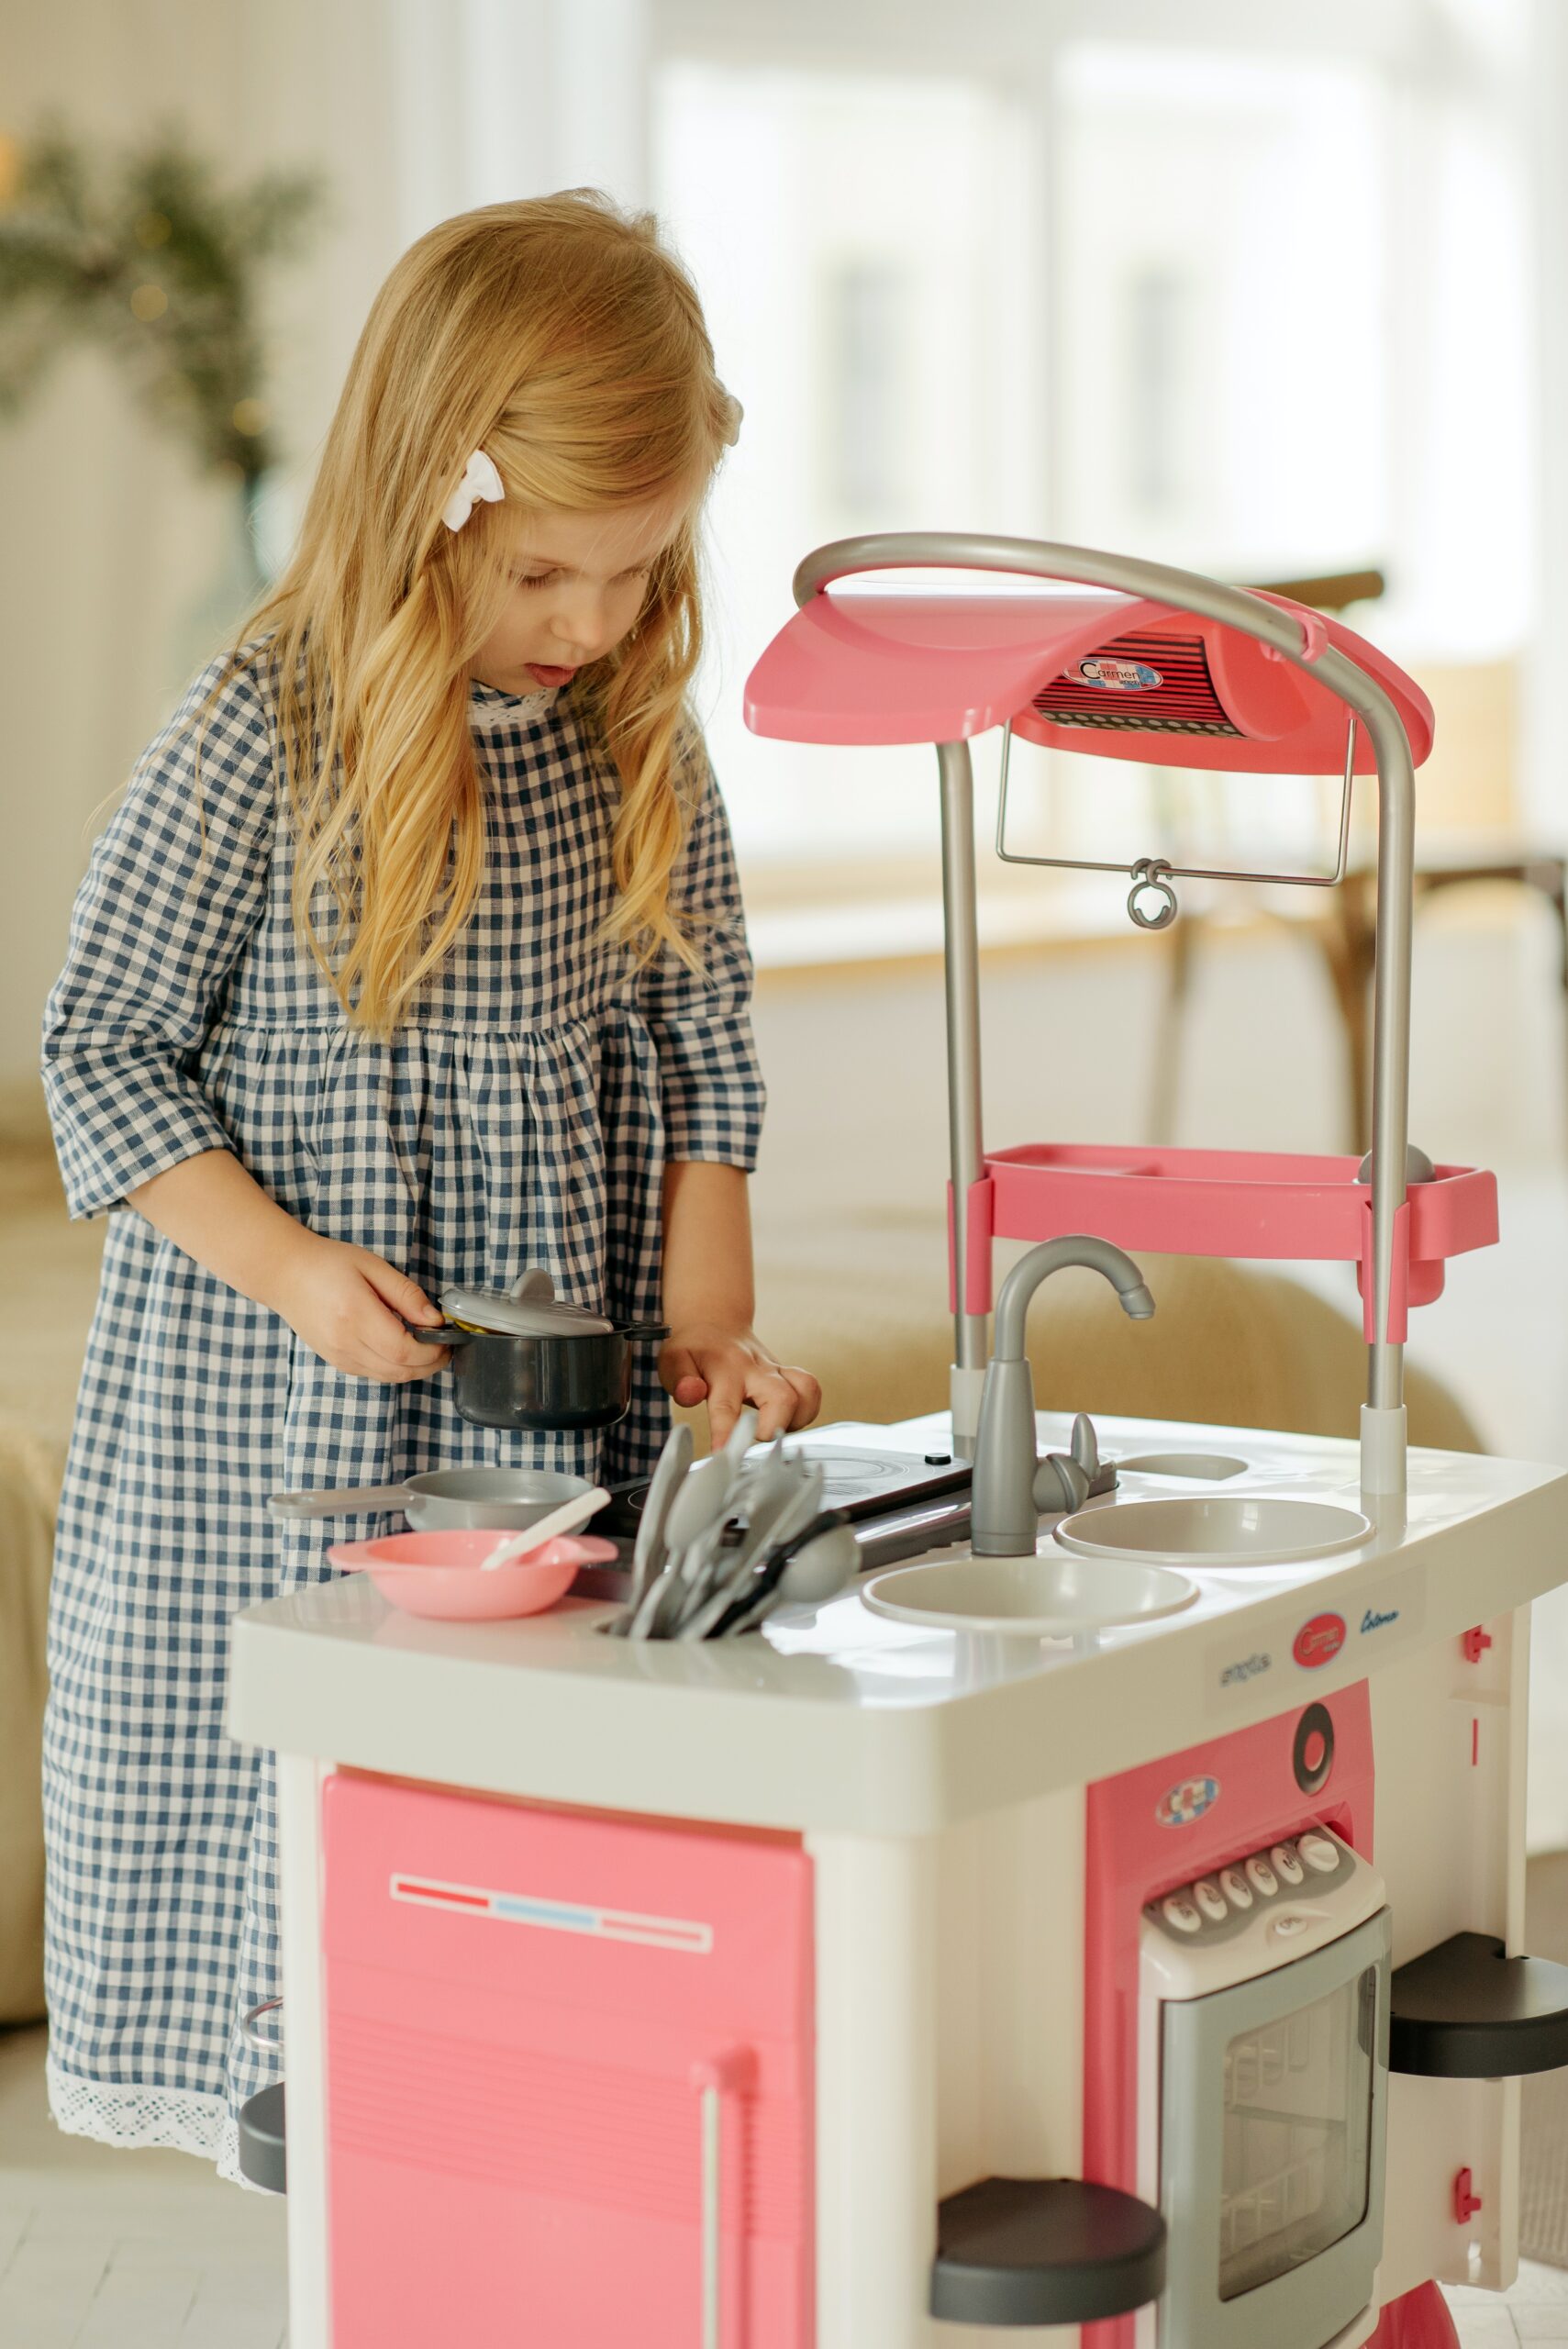 Play Kitchens 4 Reasons Why Your Child Needs One